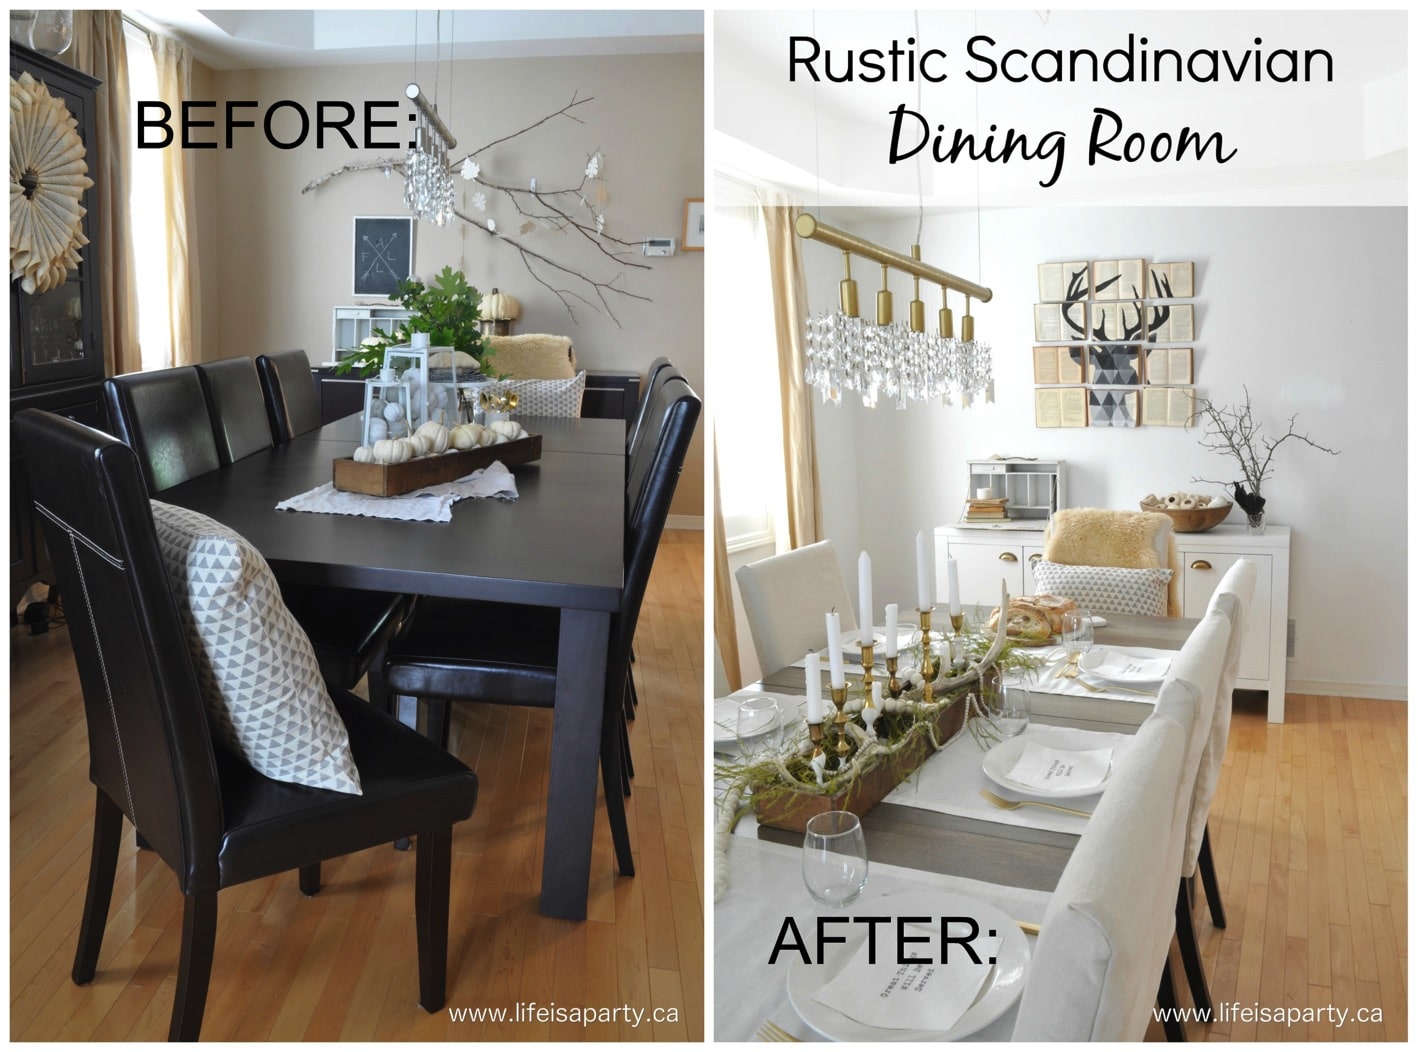 Rustic Scandinavian Living Room and Eating Area: Make over using neutrals, texture, mixing modern and rustic, natural and cozy elements -Hygge